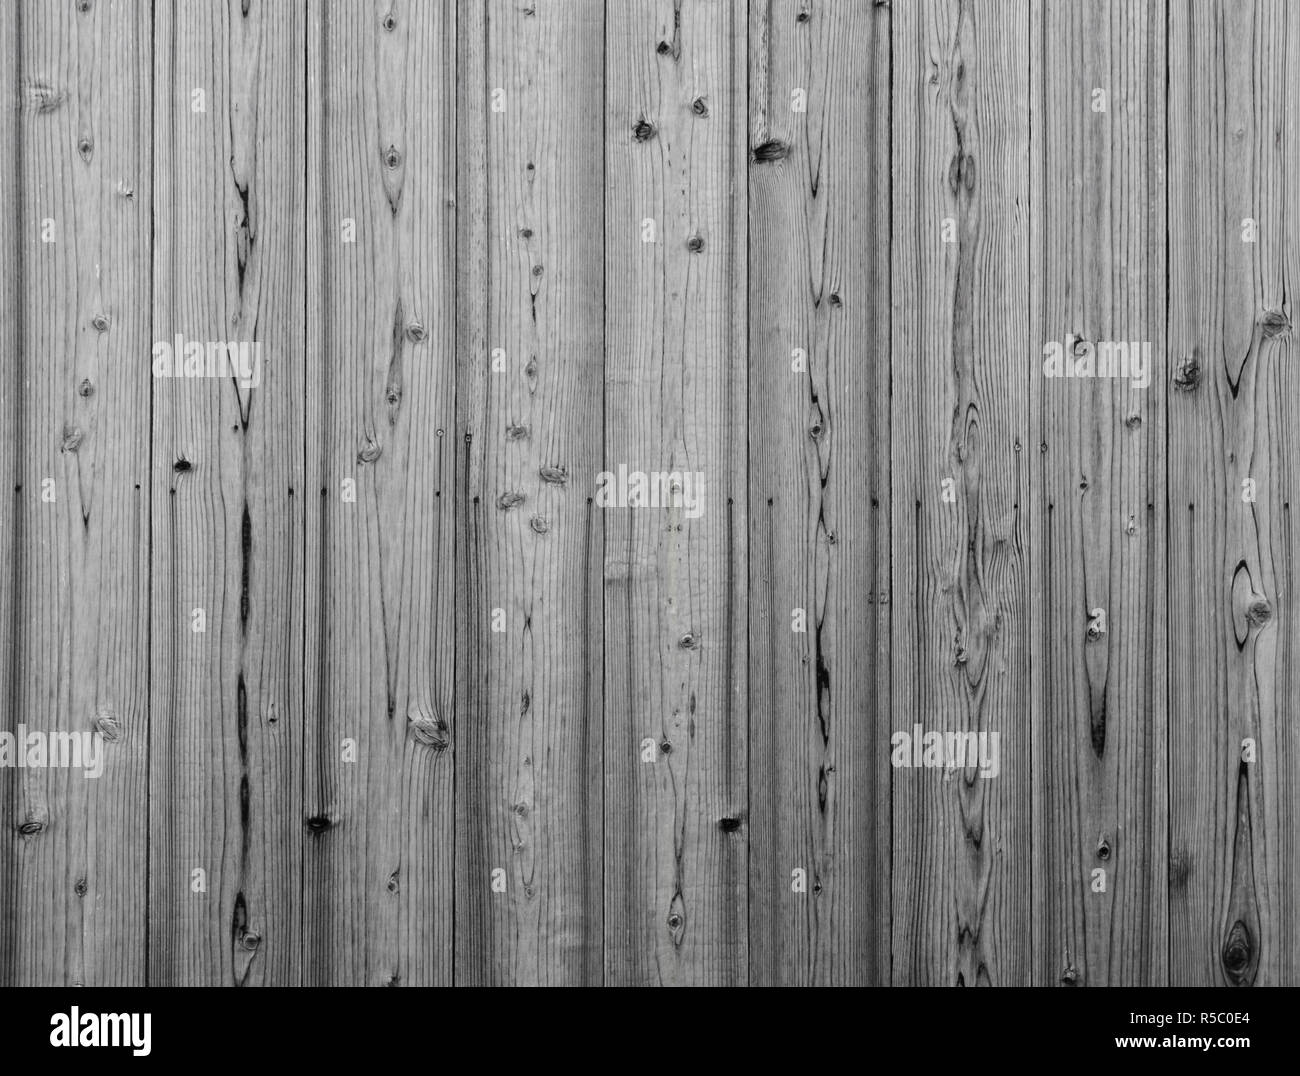 Pine wooden wall texture background Stock Photo